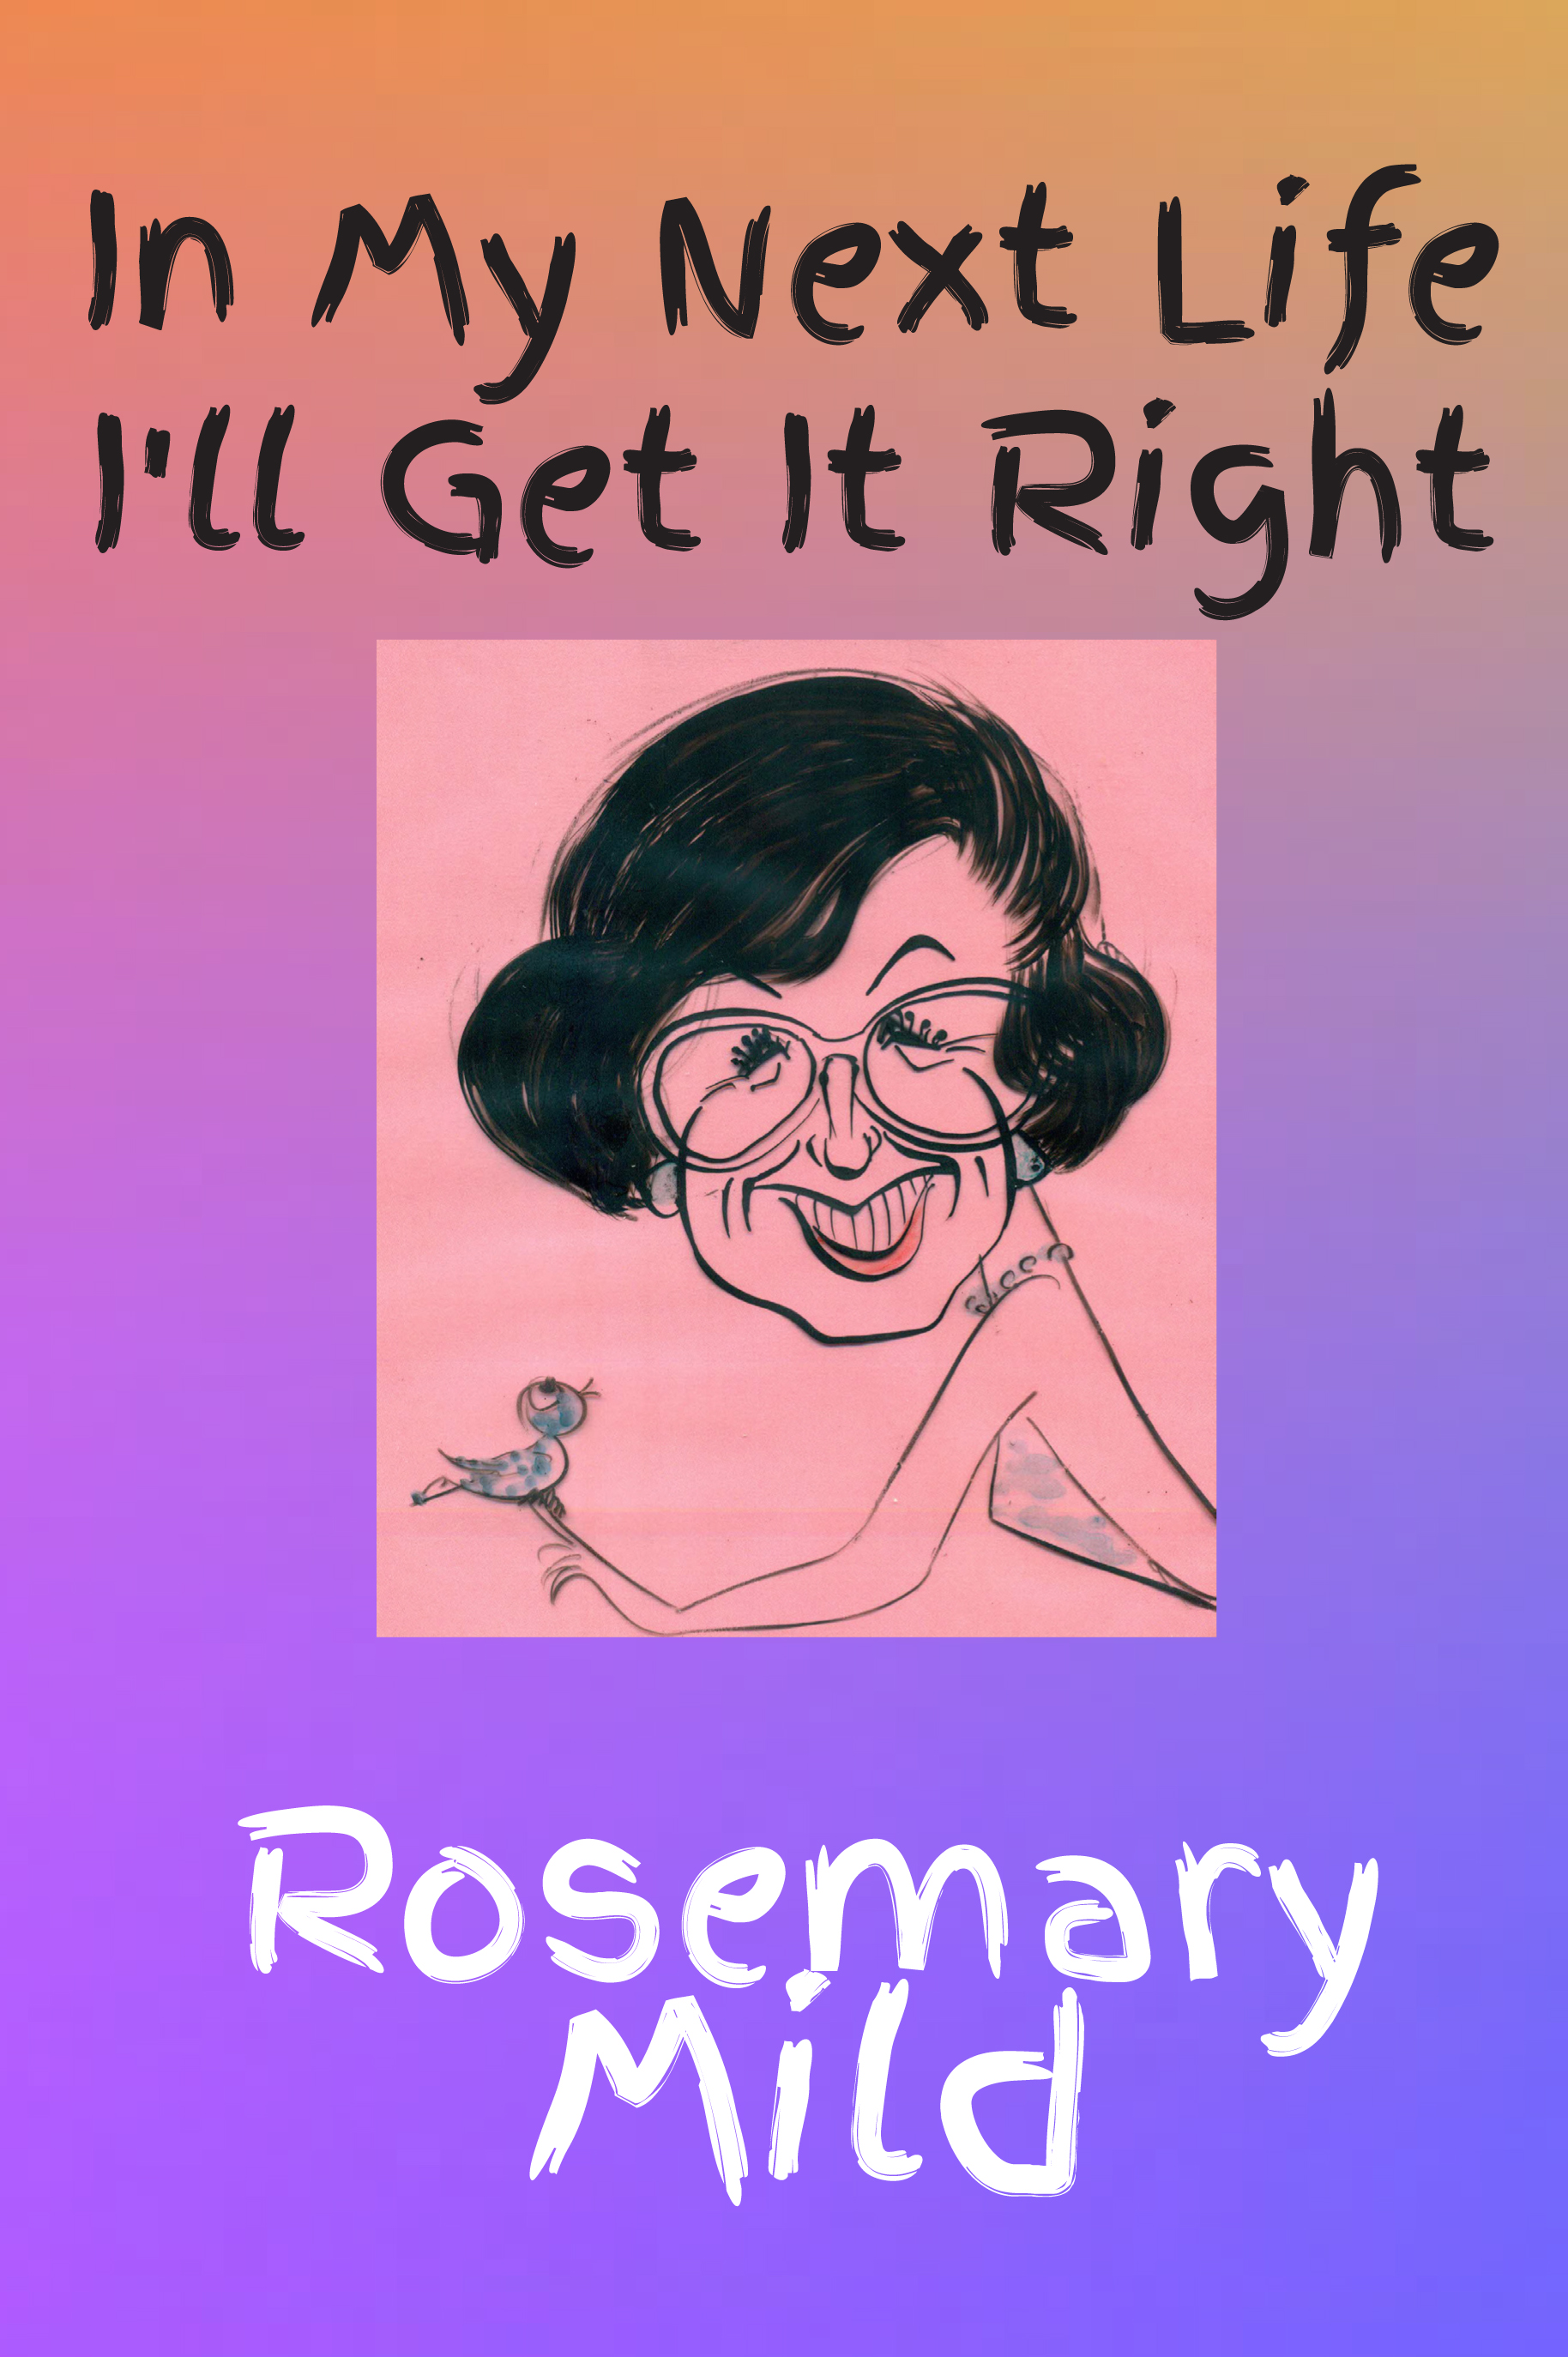 In My Next Life I'll Get It Right by Rosemary Mild